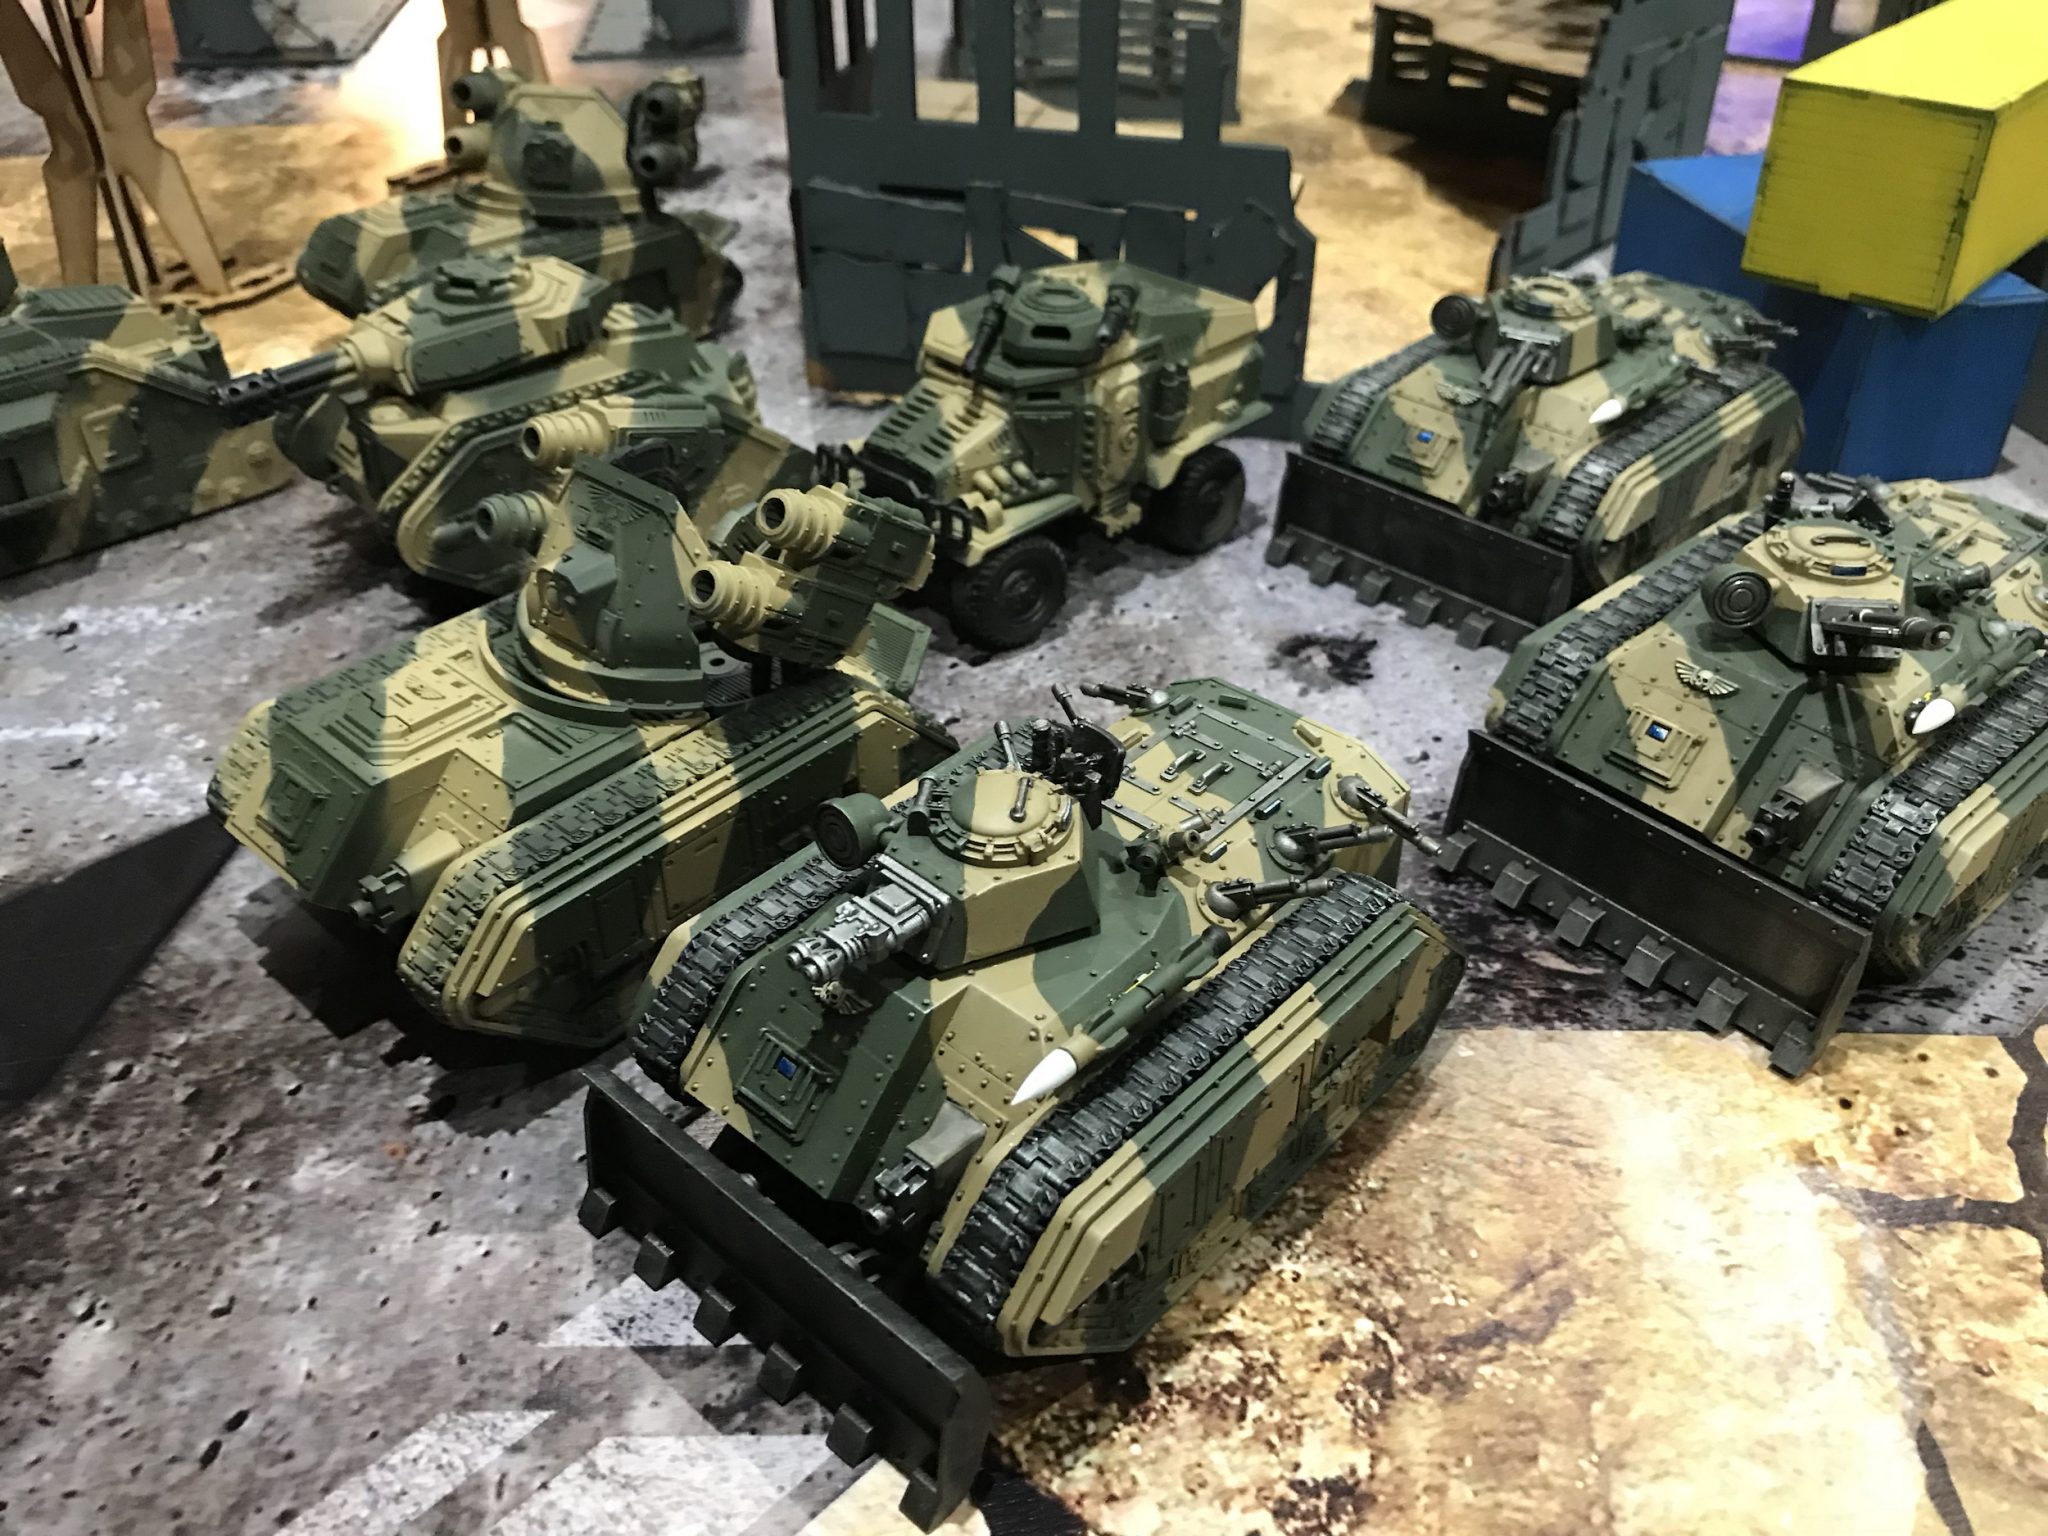 Who Are The Astra Militarum? - Handful Of Dice